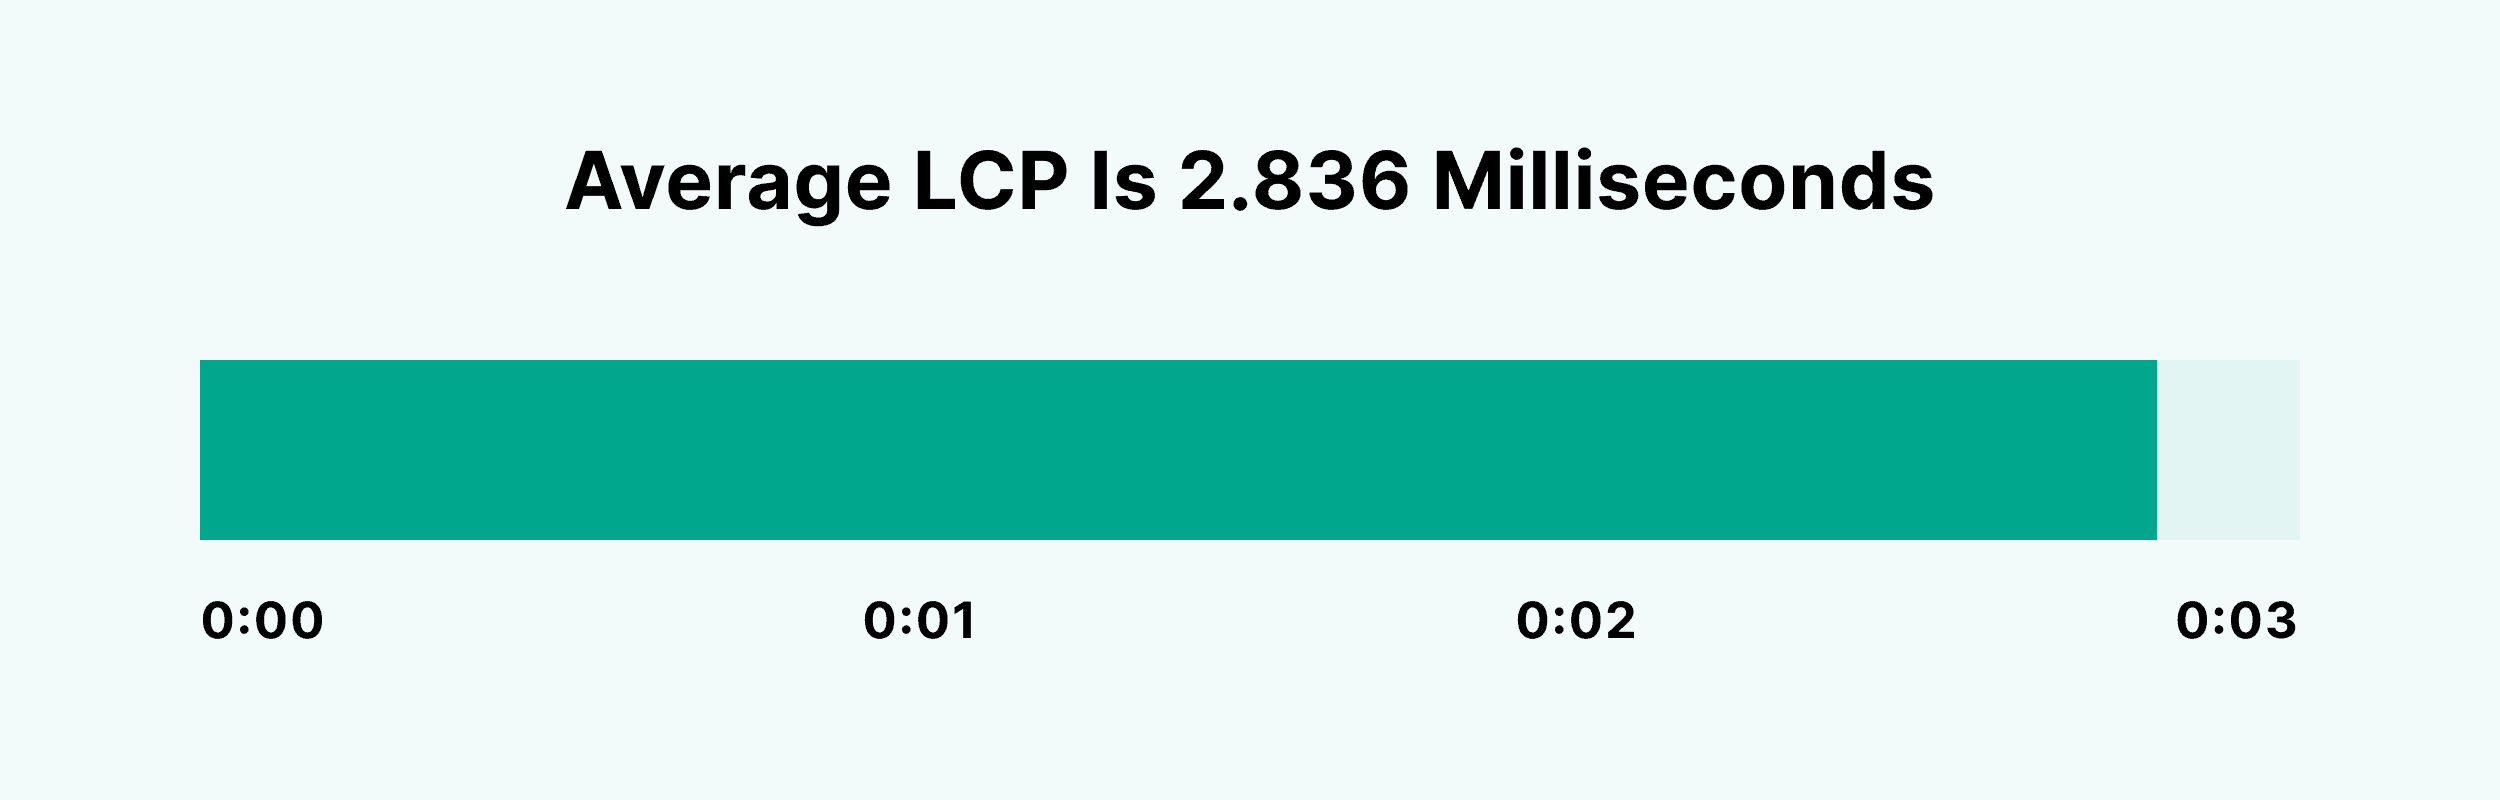 Average LCP is 2.836 milliseconds